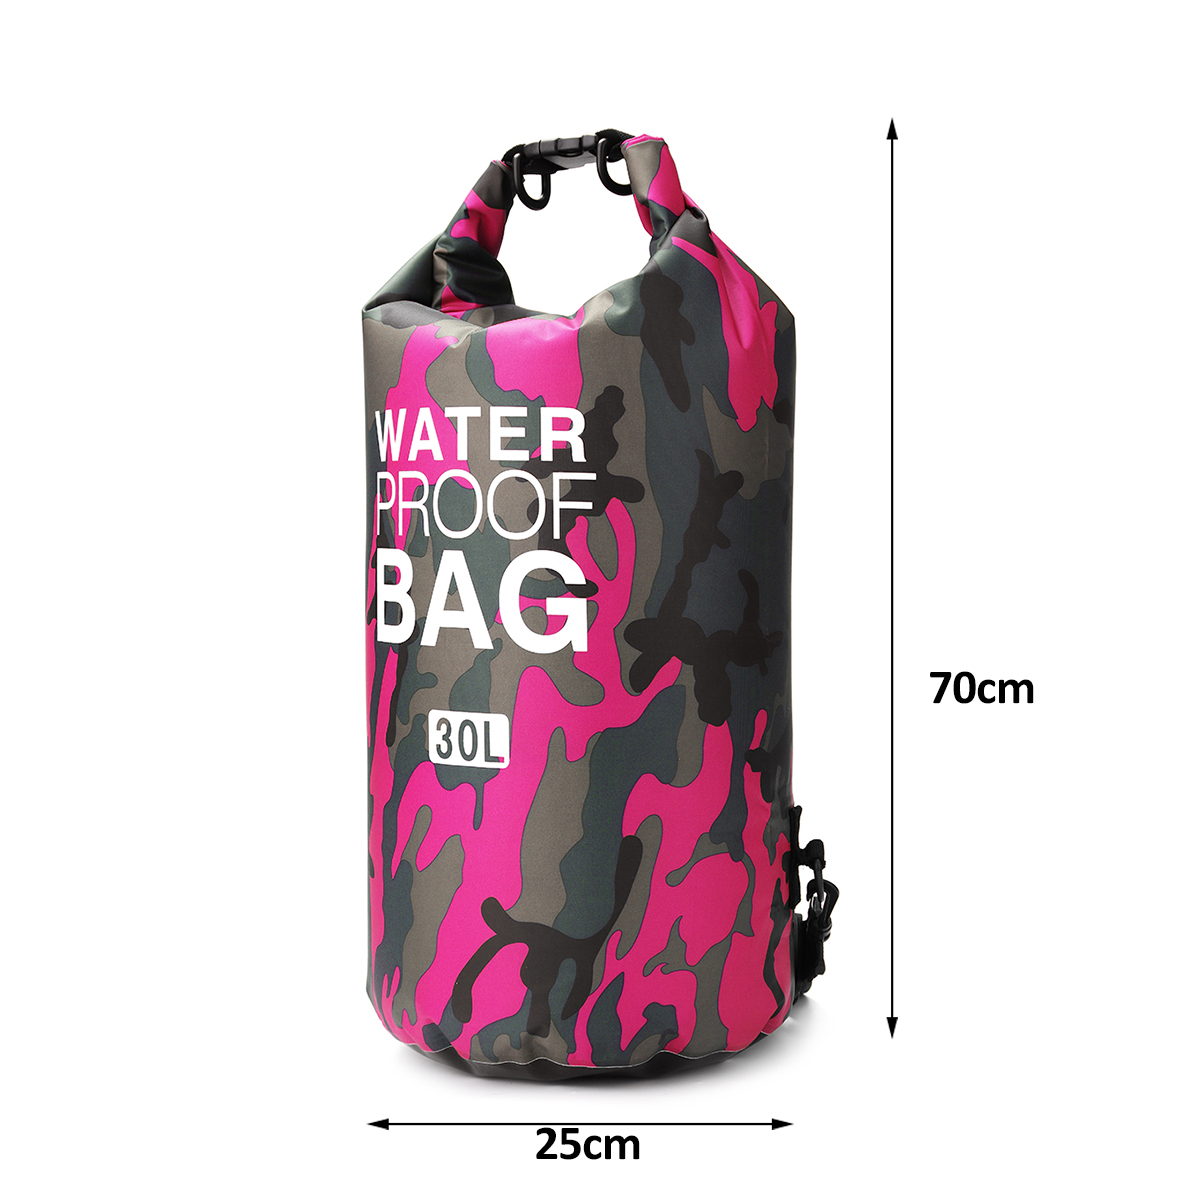 30L-Outdoor-Sports-Waterproof-Dry-Bag-Backpack-Pouch-For-Floating-Boating-Kayaking-Camping-1338574-2